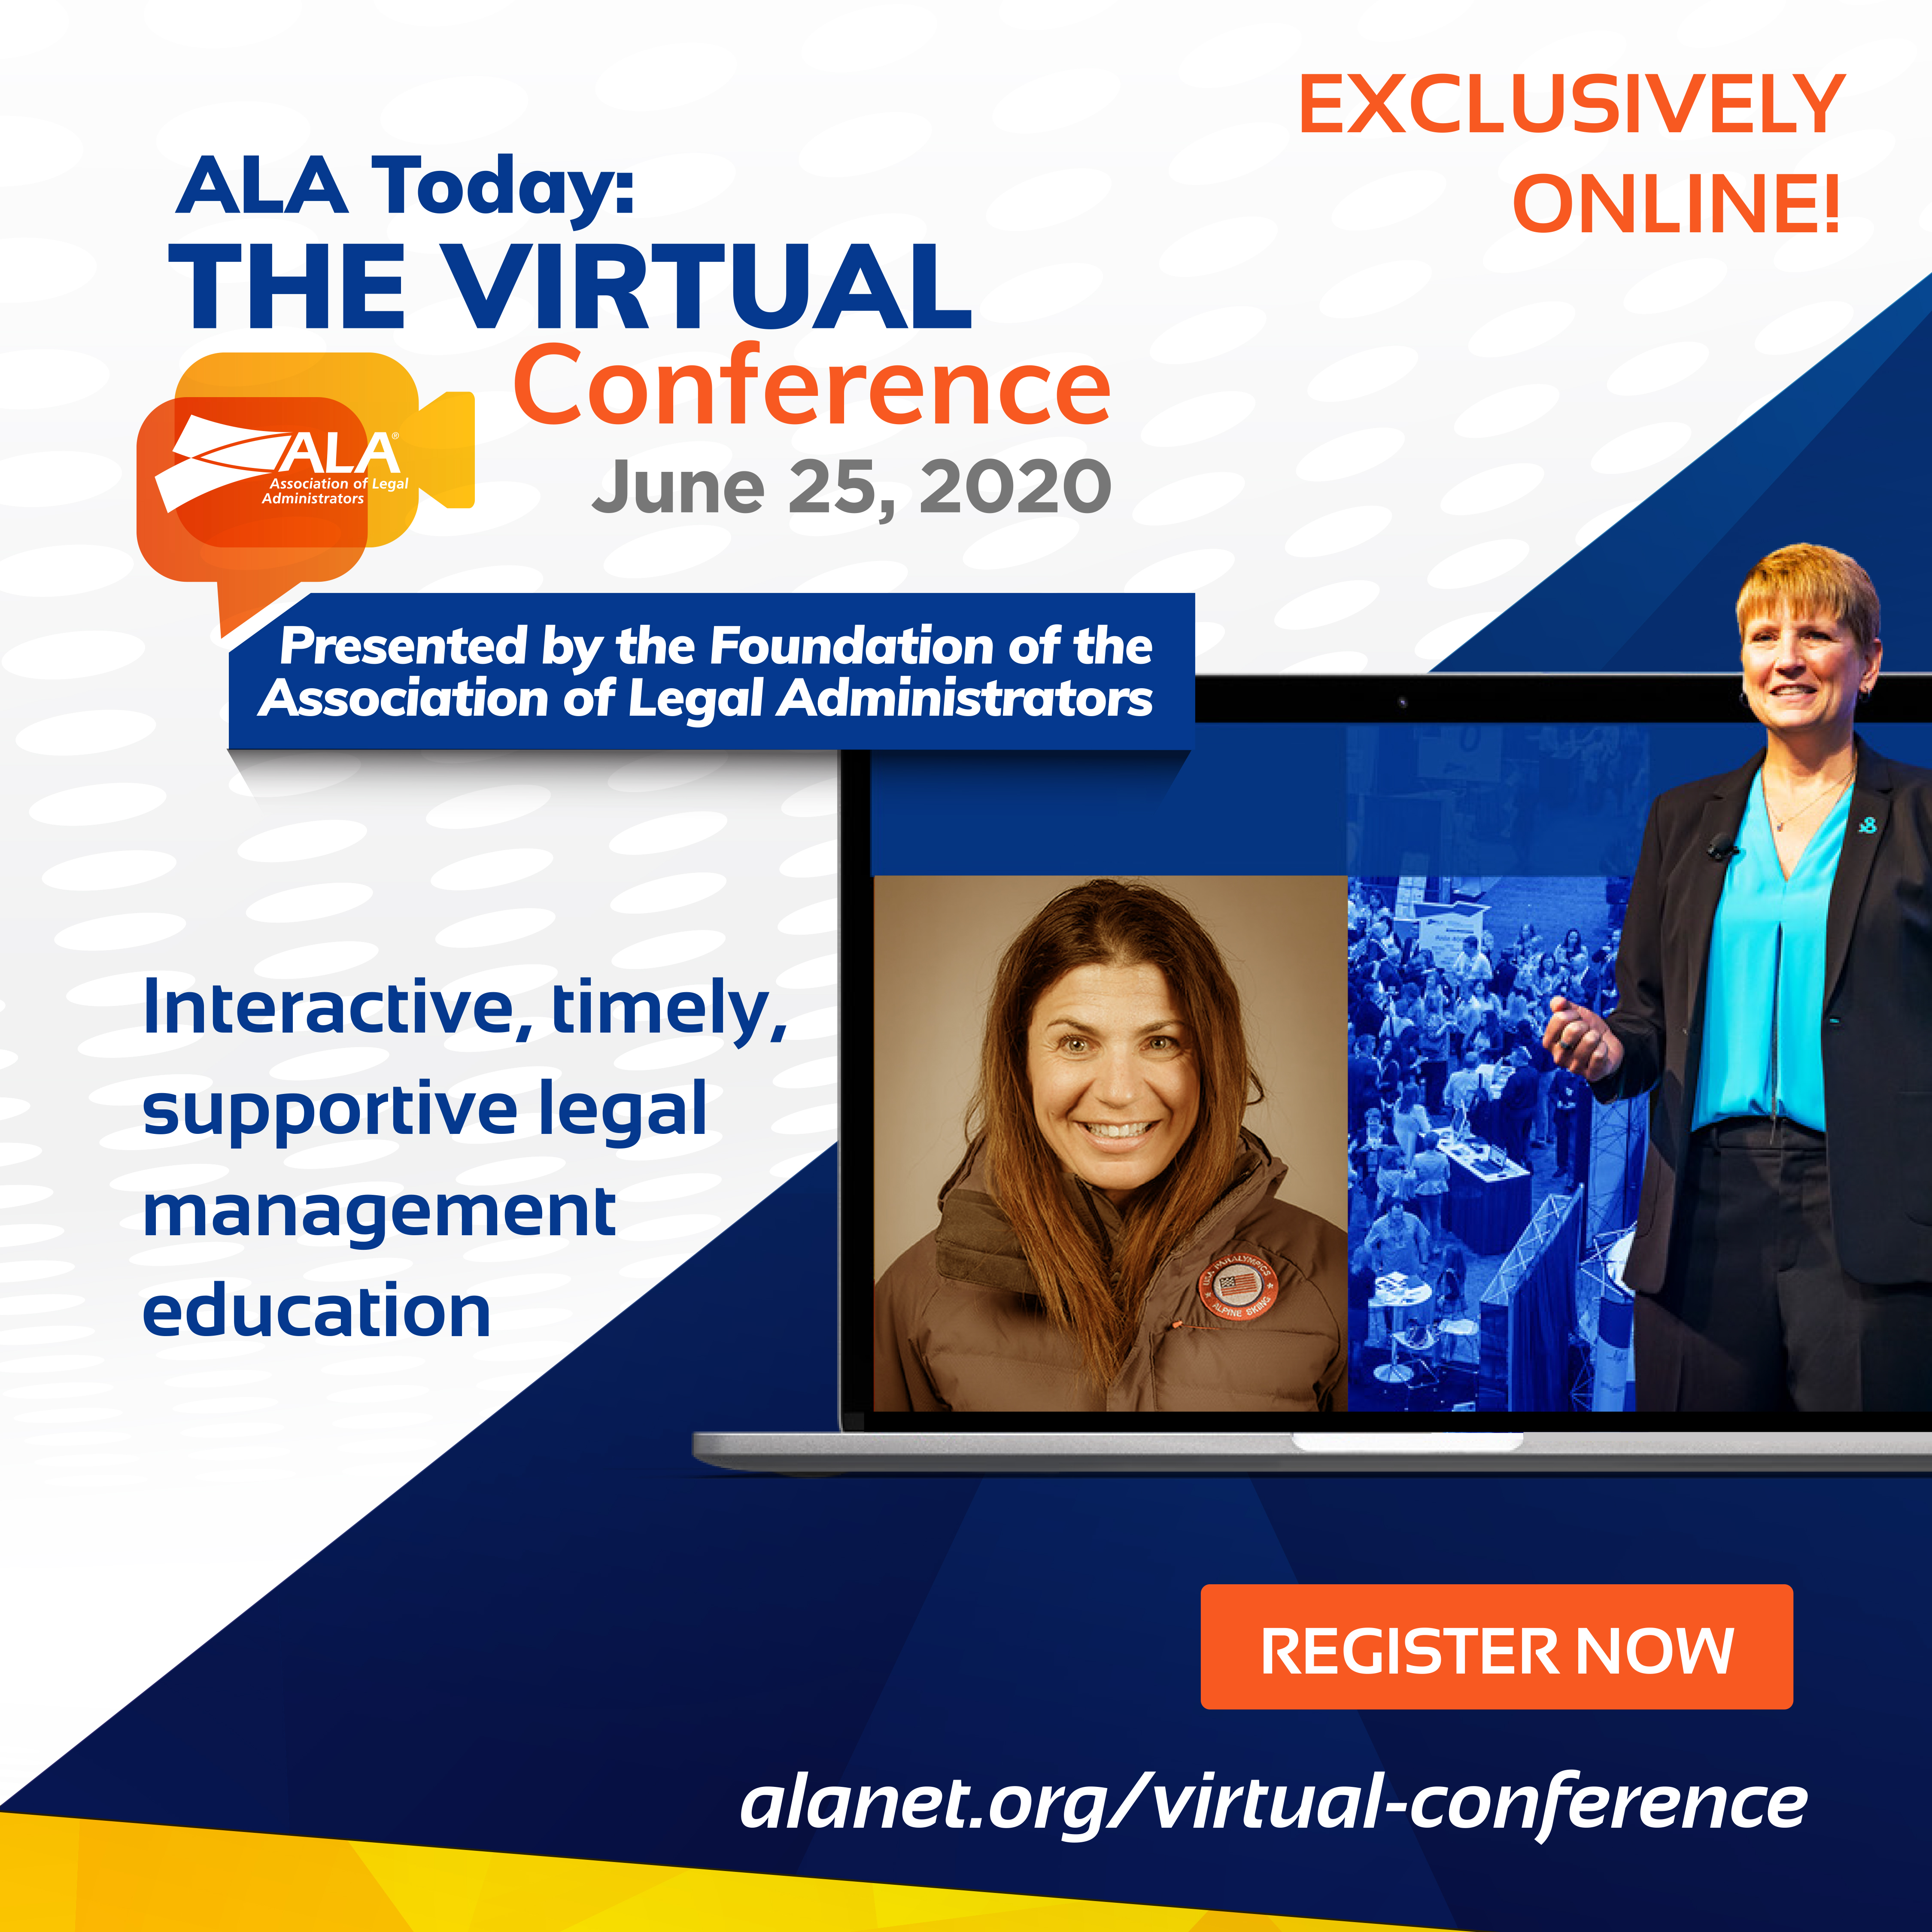 2020-ALA-Today-Virtual-Conference-Register-1080x1080